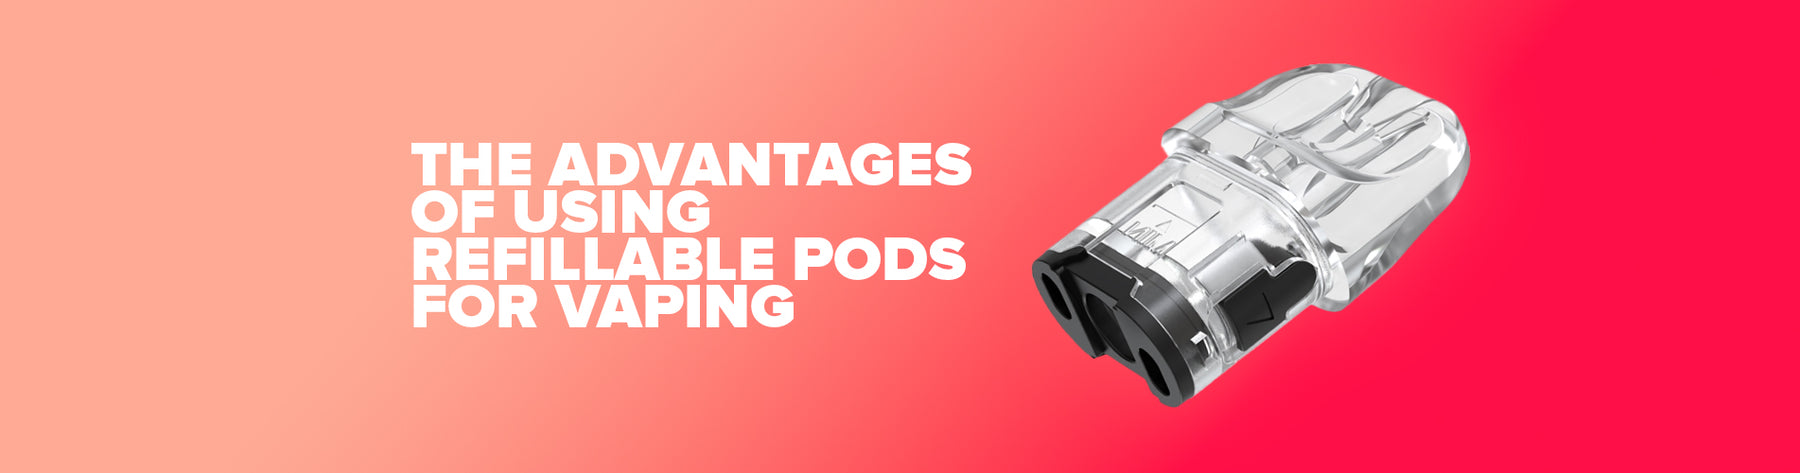 The Advantages Of Using Refillable Pods For Vaping